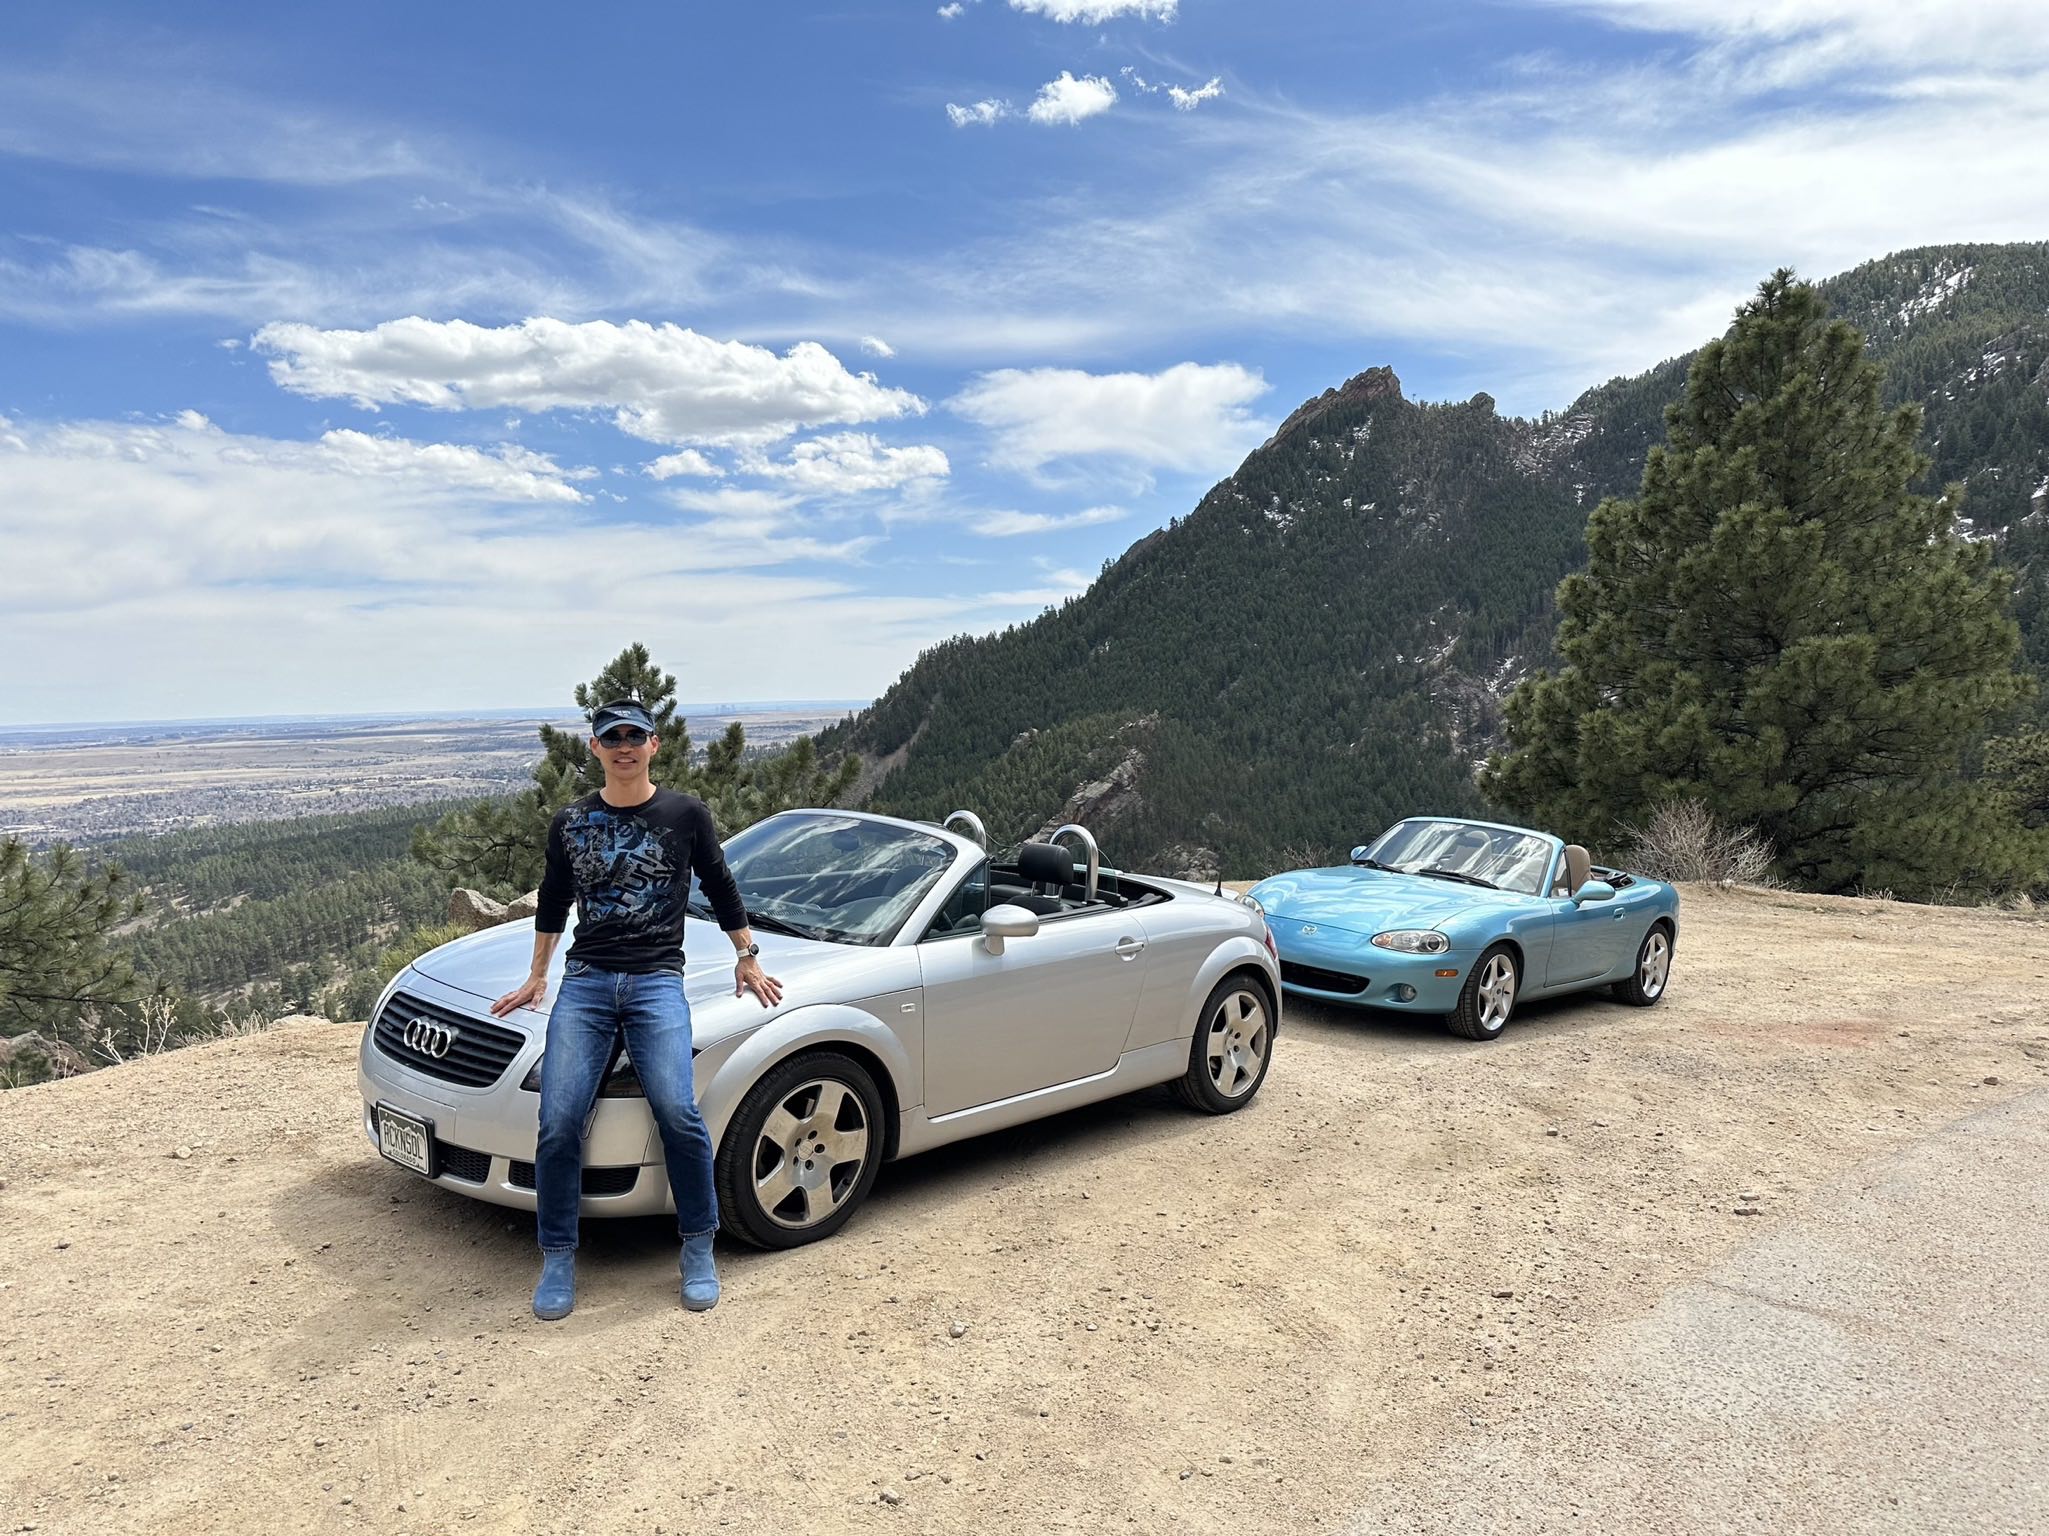 Felix Wong with his silver Audi TT Roadster Quattro Roadster at an overlook on Flagstaff Road west of Boulder, Colorado. Manuel's crystal blue metallic Mazda Miata is behind.